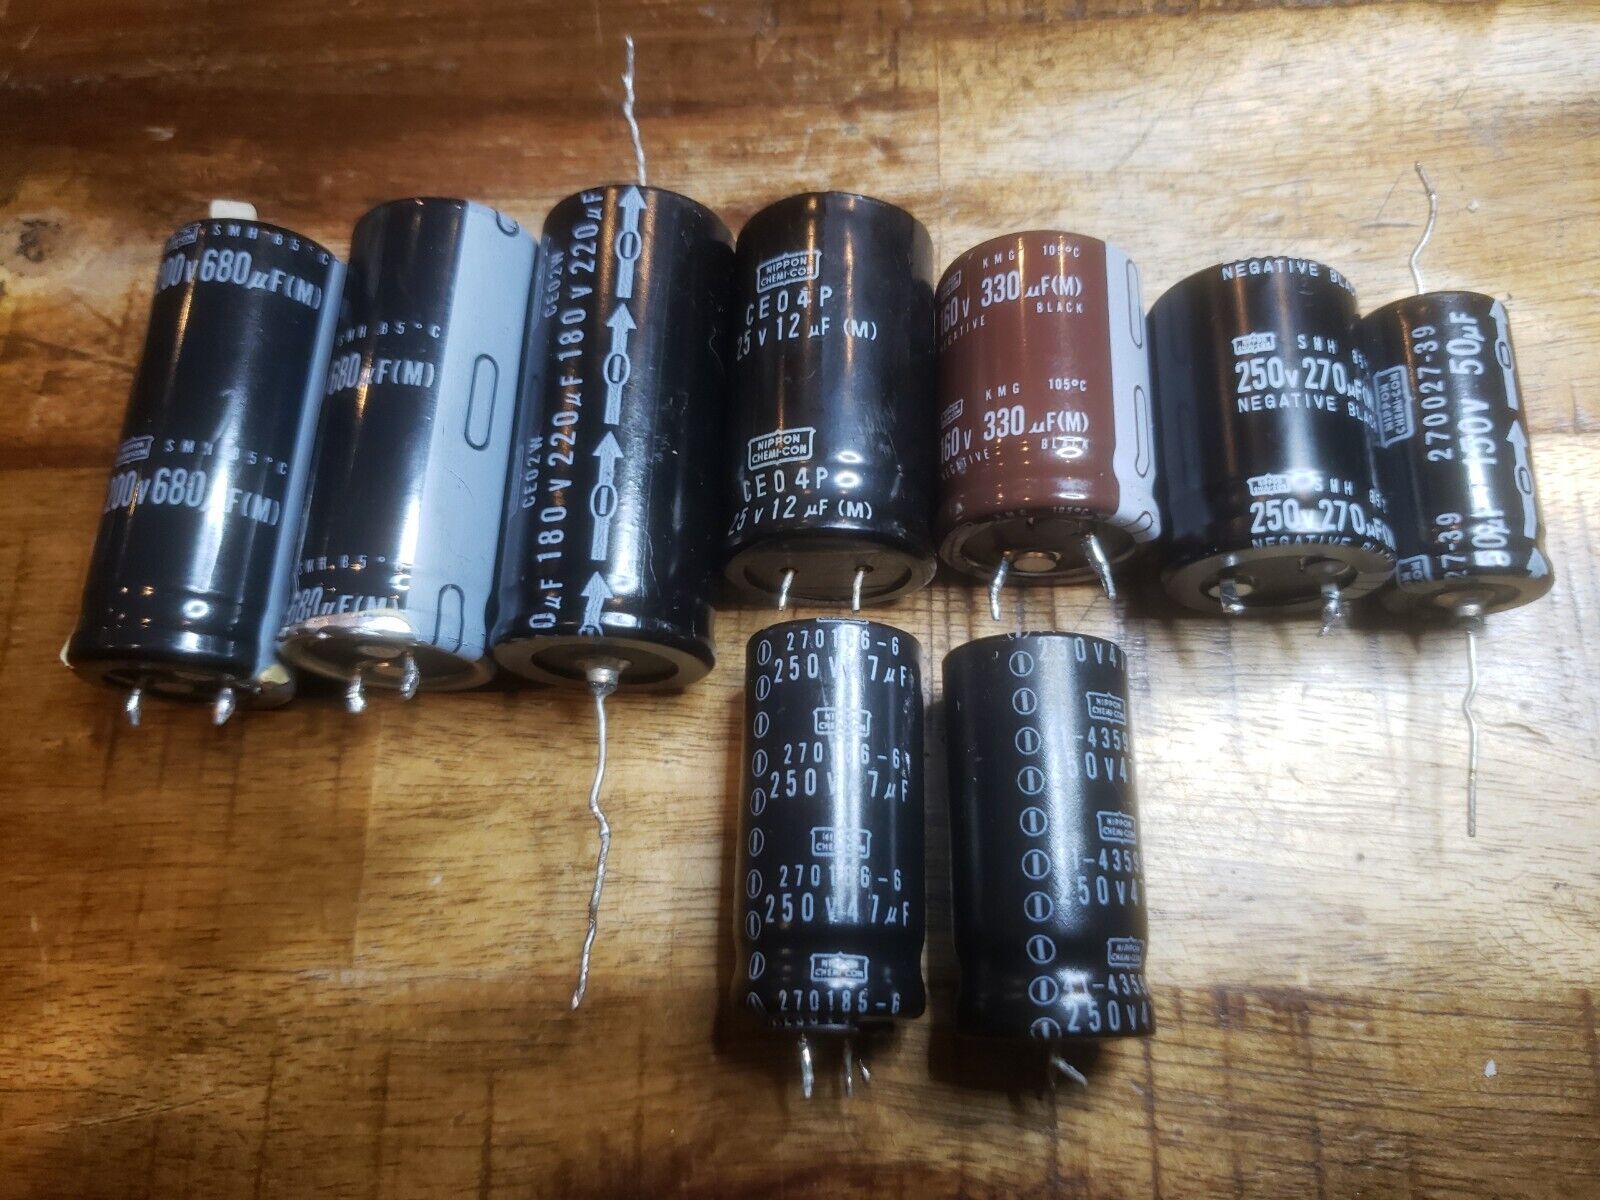 Lot of 9 Nippon Chemi-con Capacitors Various sizes